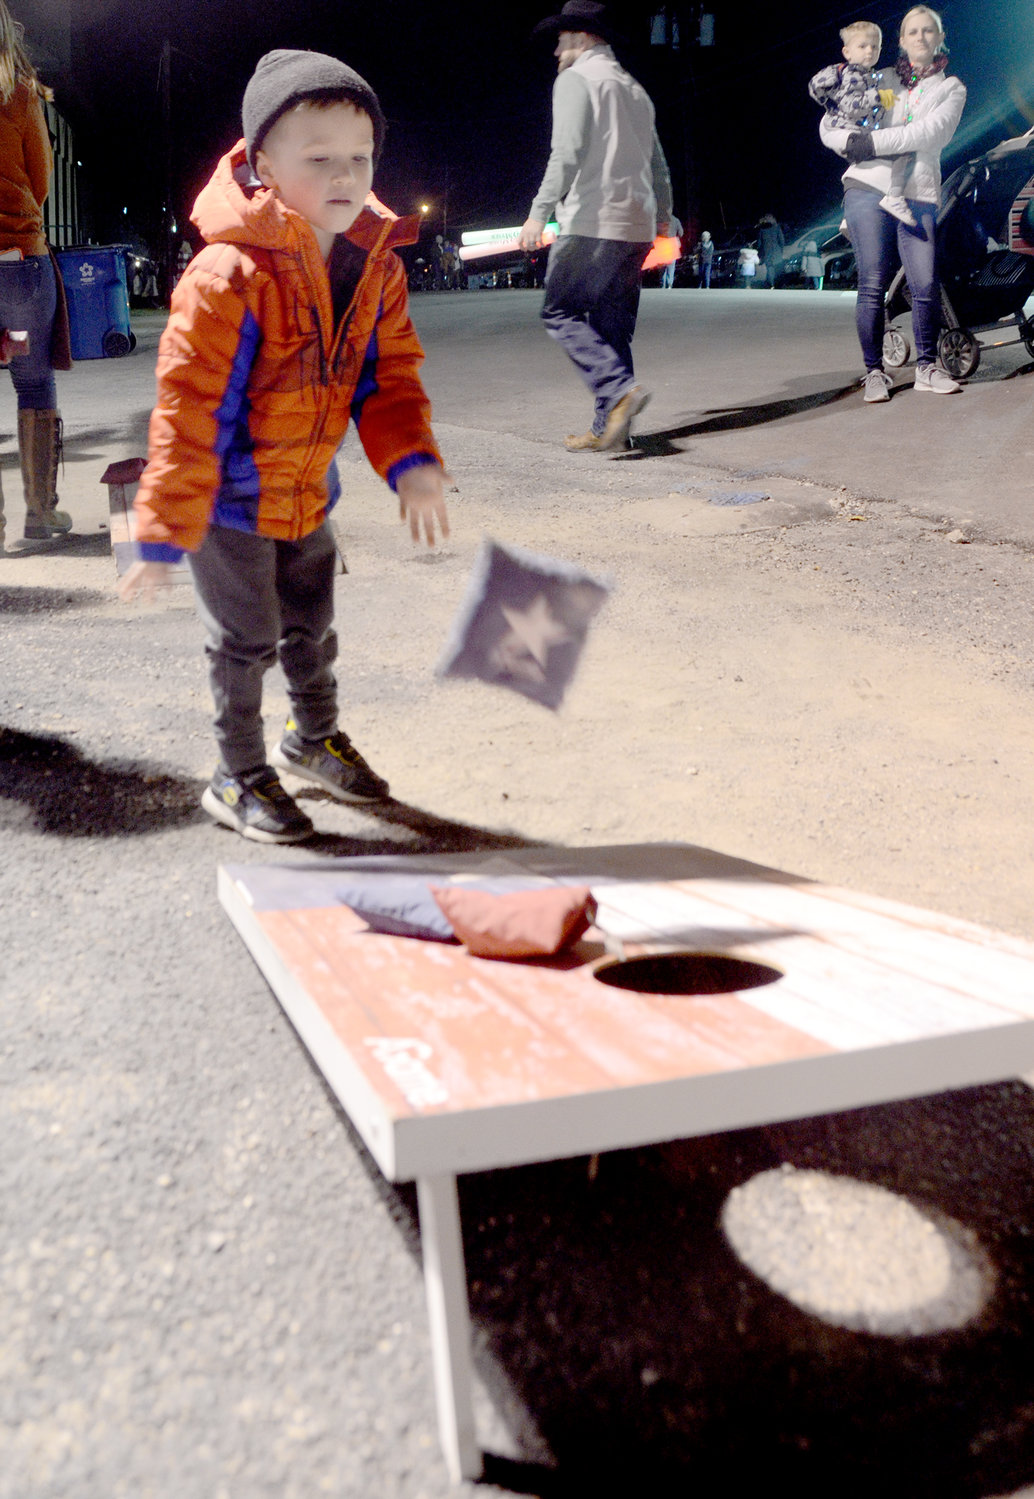 Four-year-old Lucas Welch enjoys the corn hole toss.